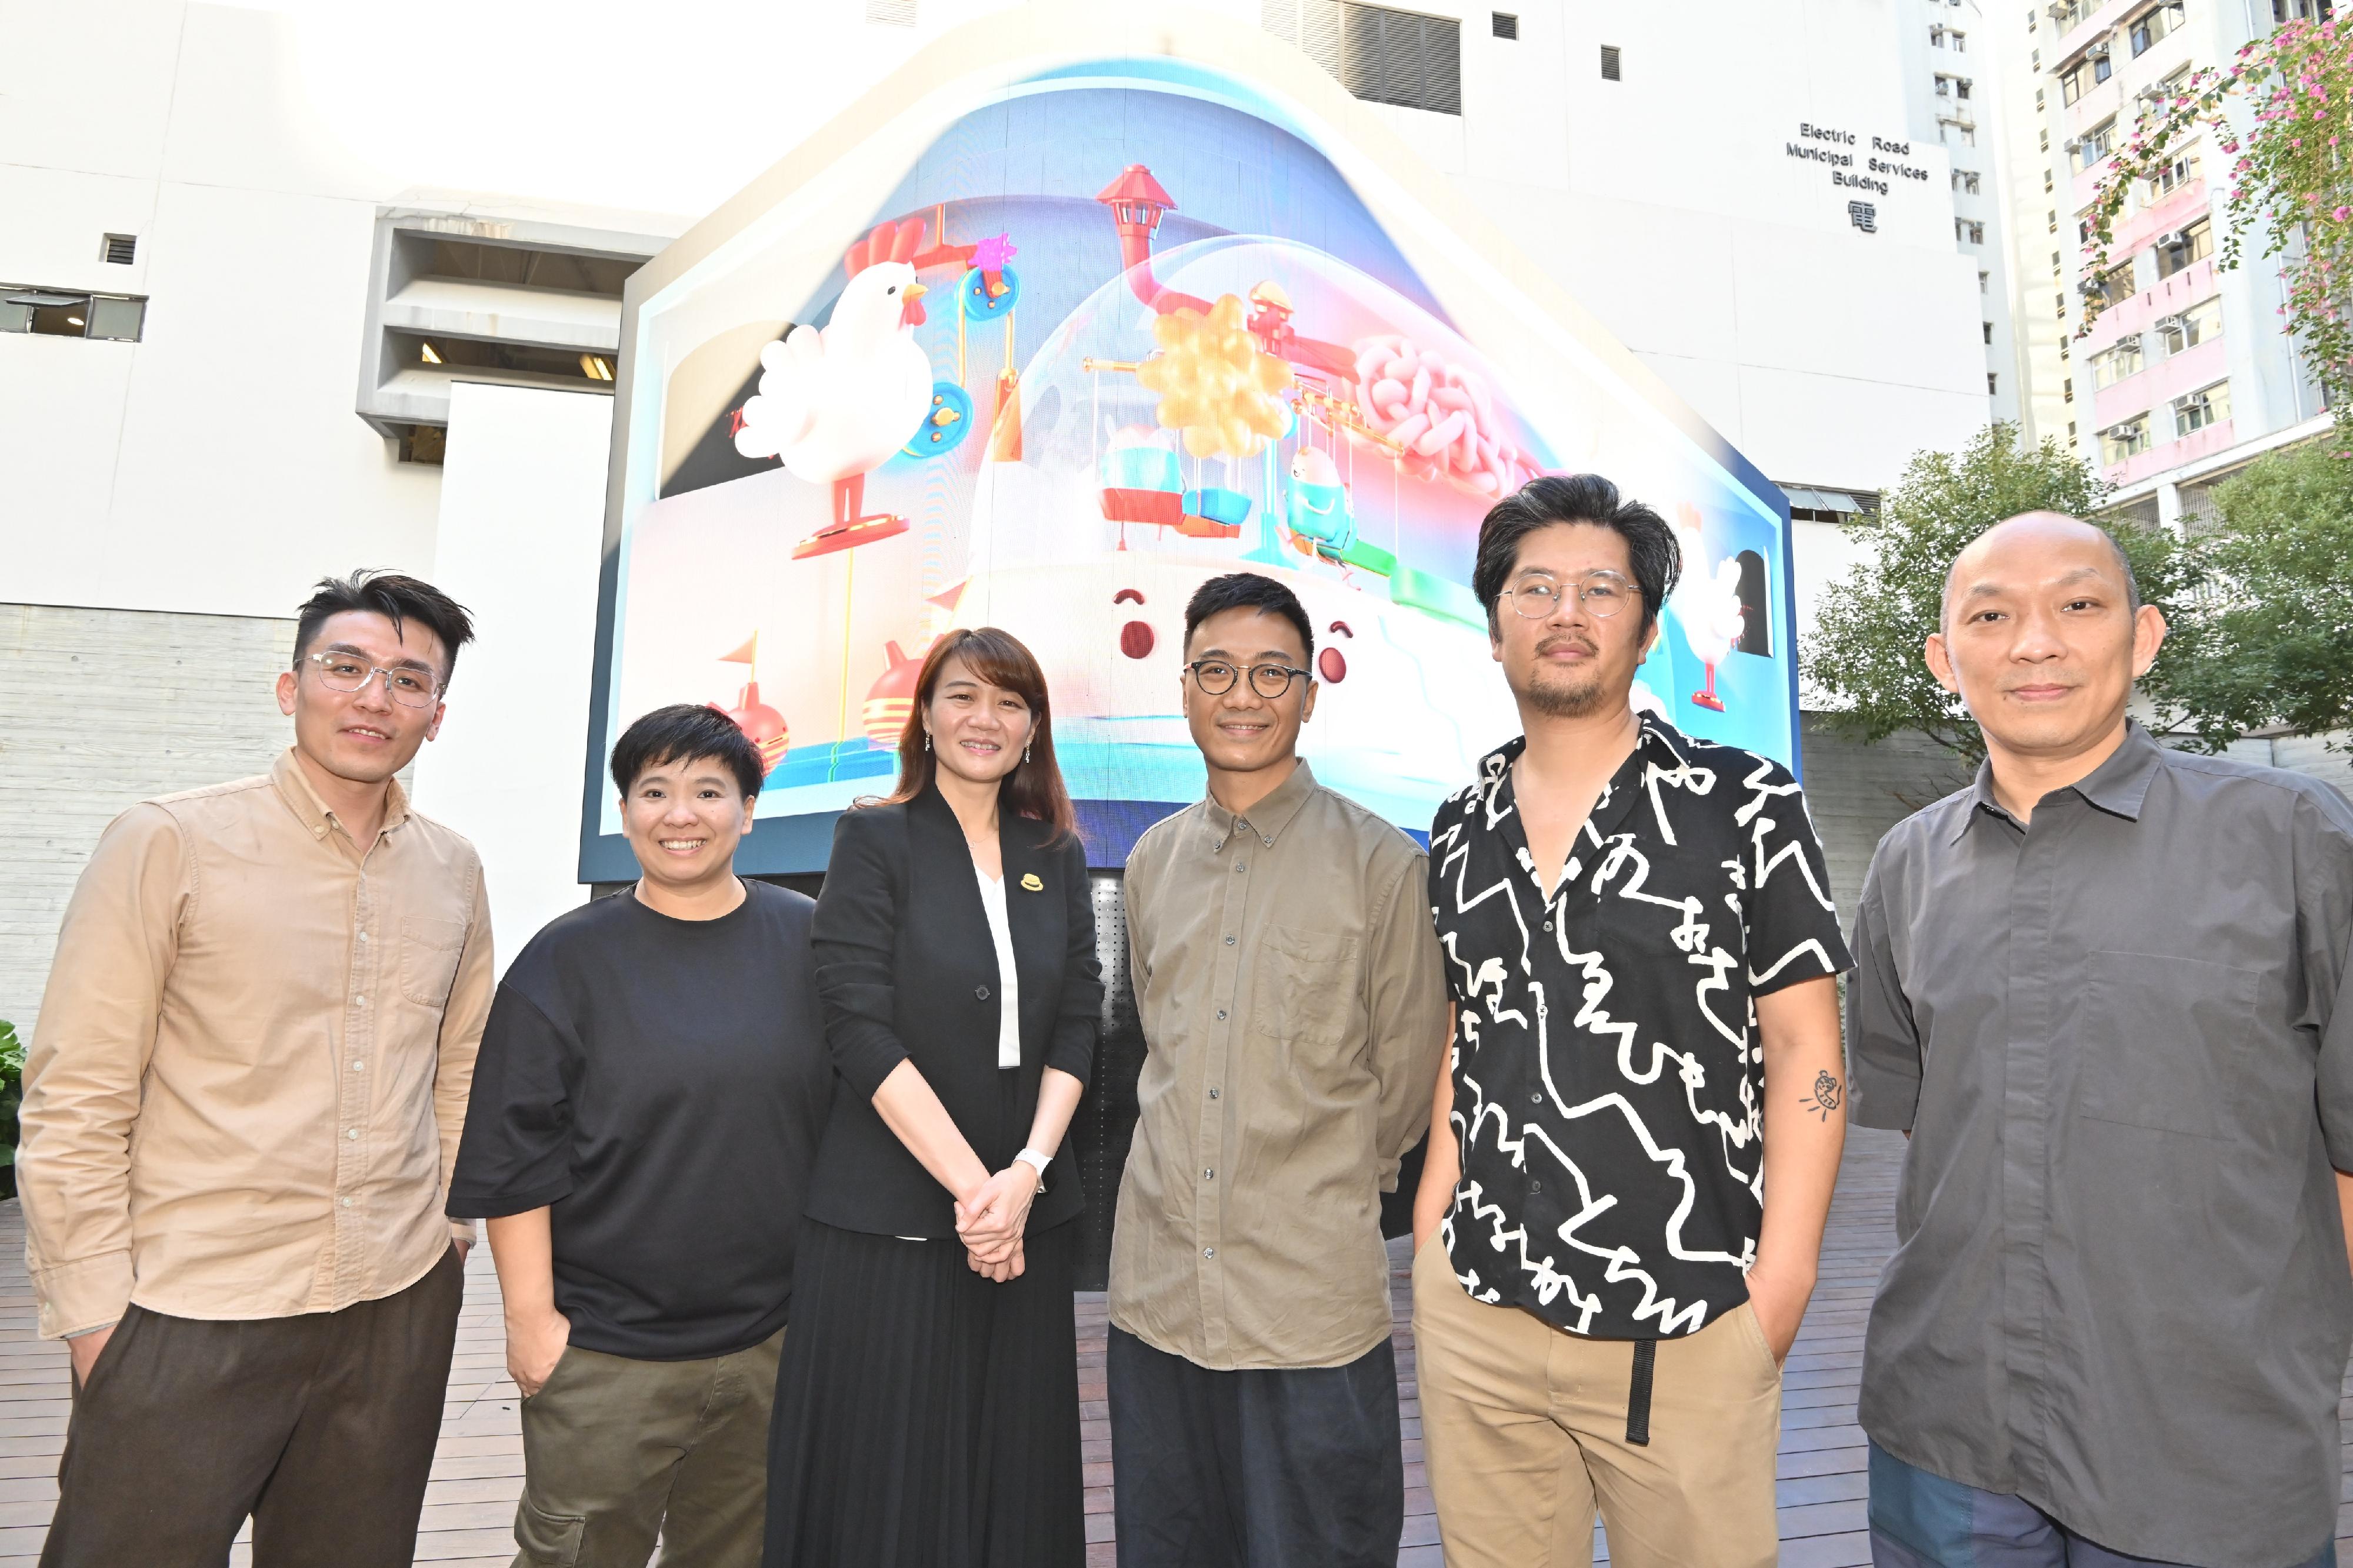 The new exhibition of the Oil Street Art Space (Oi!), "The Digital Cuboid: Virtual Realm", will be on display from tomorrow (December 16) to bring a profound impact on the viewers' visual perception through presenting naked-eye 3D animations on a large high-definition screen. Photo shows the Curator of Oi!, Prudence Ma (third left); media artist Ng Tsz-kwan who is the exhibition's Creative Technologist (third right); and representatives of participating art groups CT.LAB, Axis Studio, Nine Monkeys Workshop and Zheng Mahler.